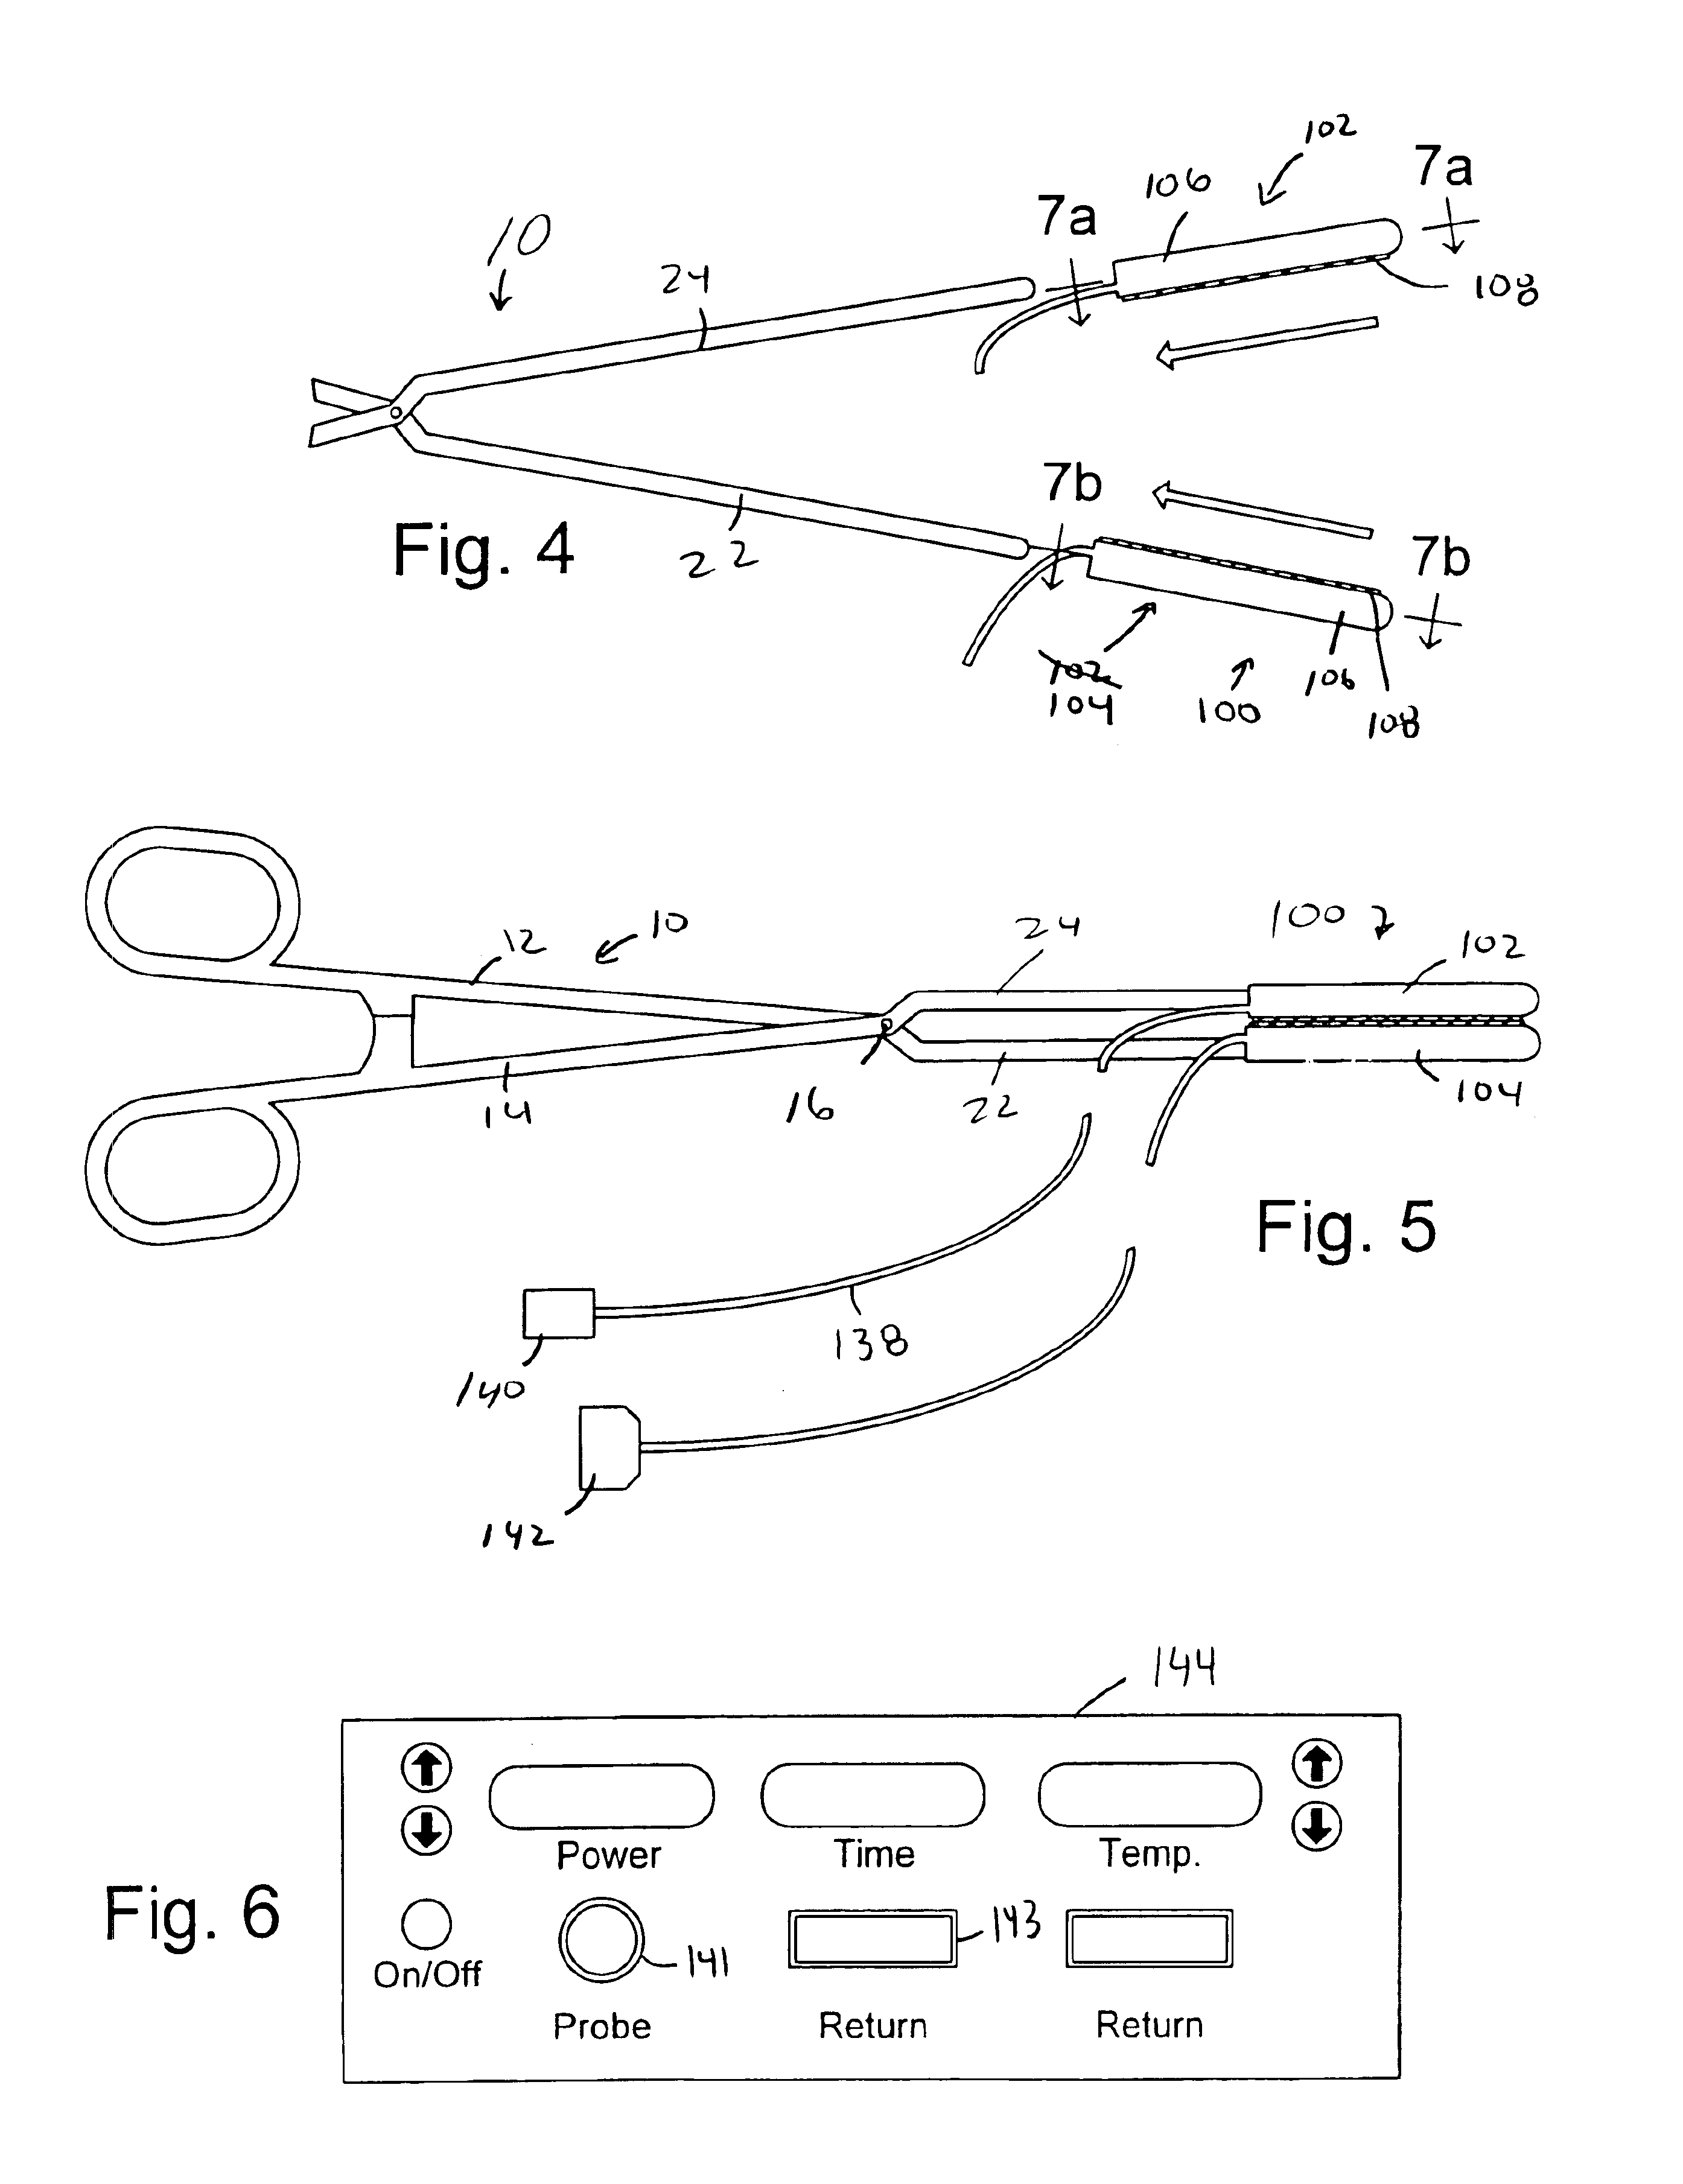 Apparatus for converting a clamp into an electrophysiology device